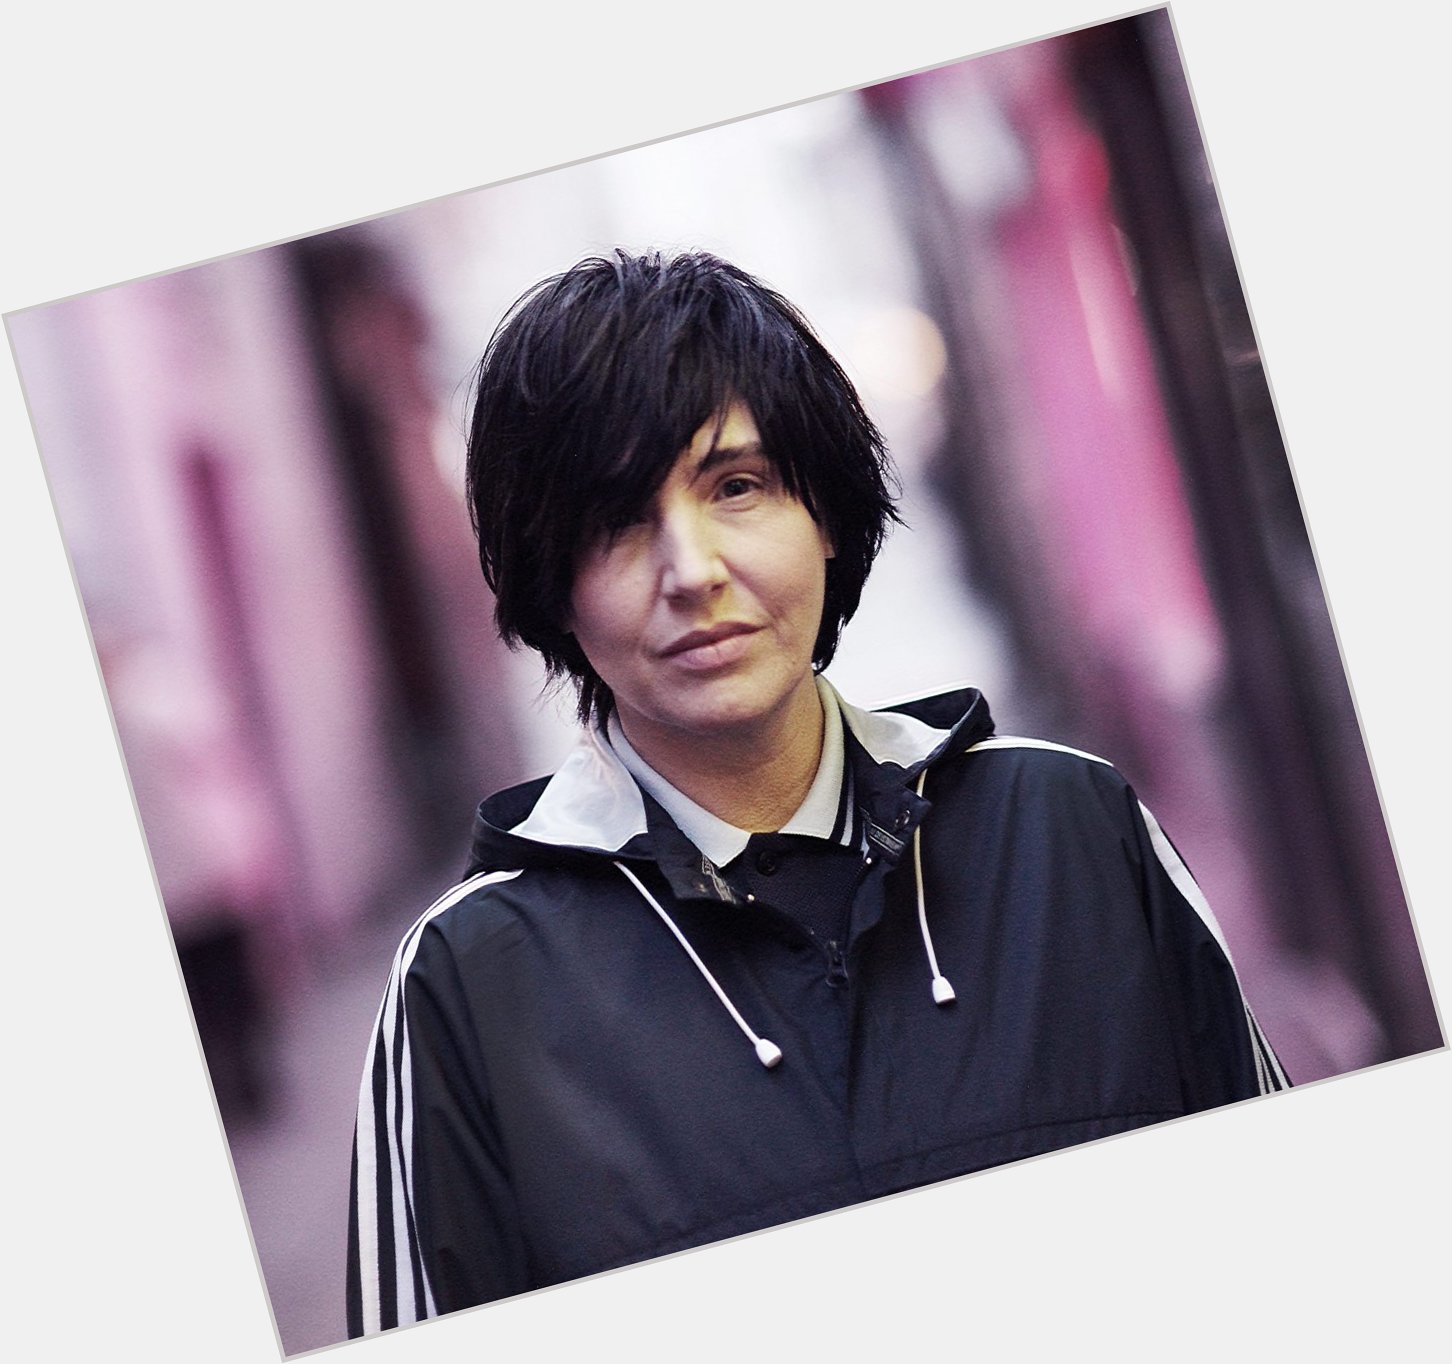 Happy 52nd birthday star Sharleen Spiteri!

If you had to pick one Texas song? 